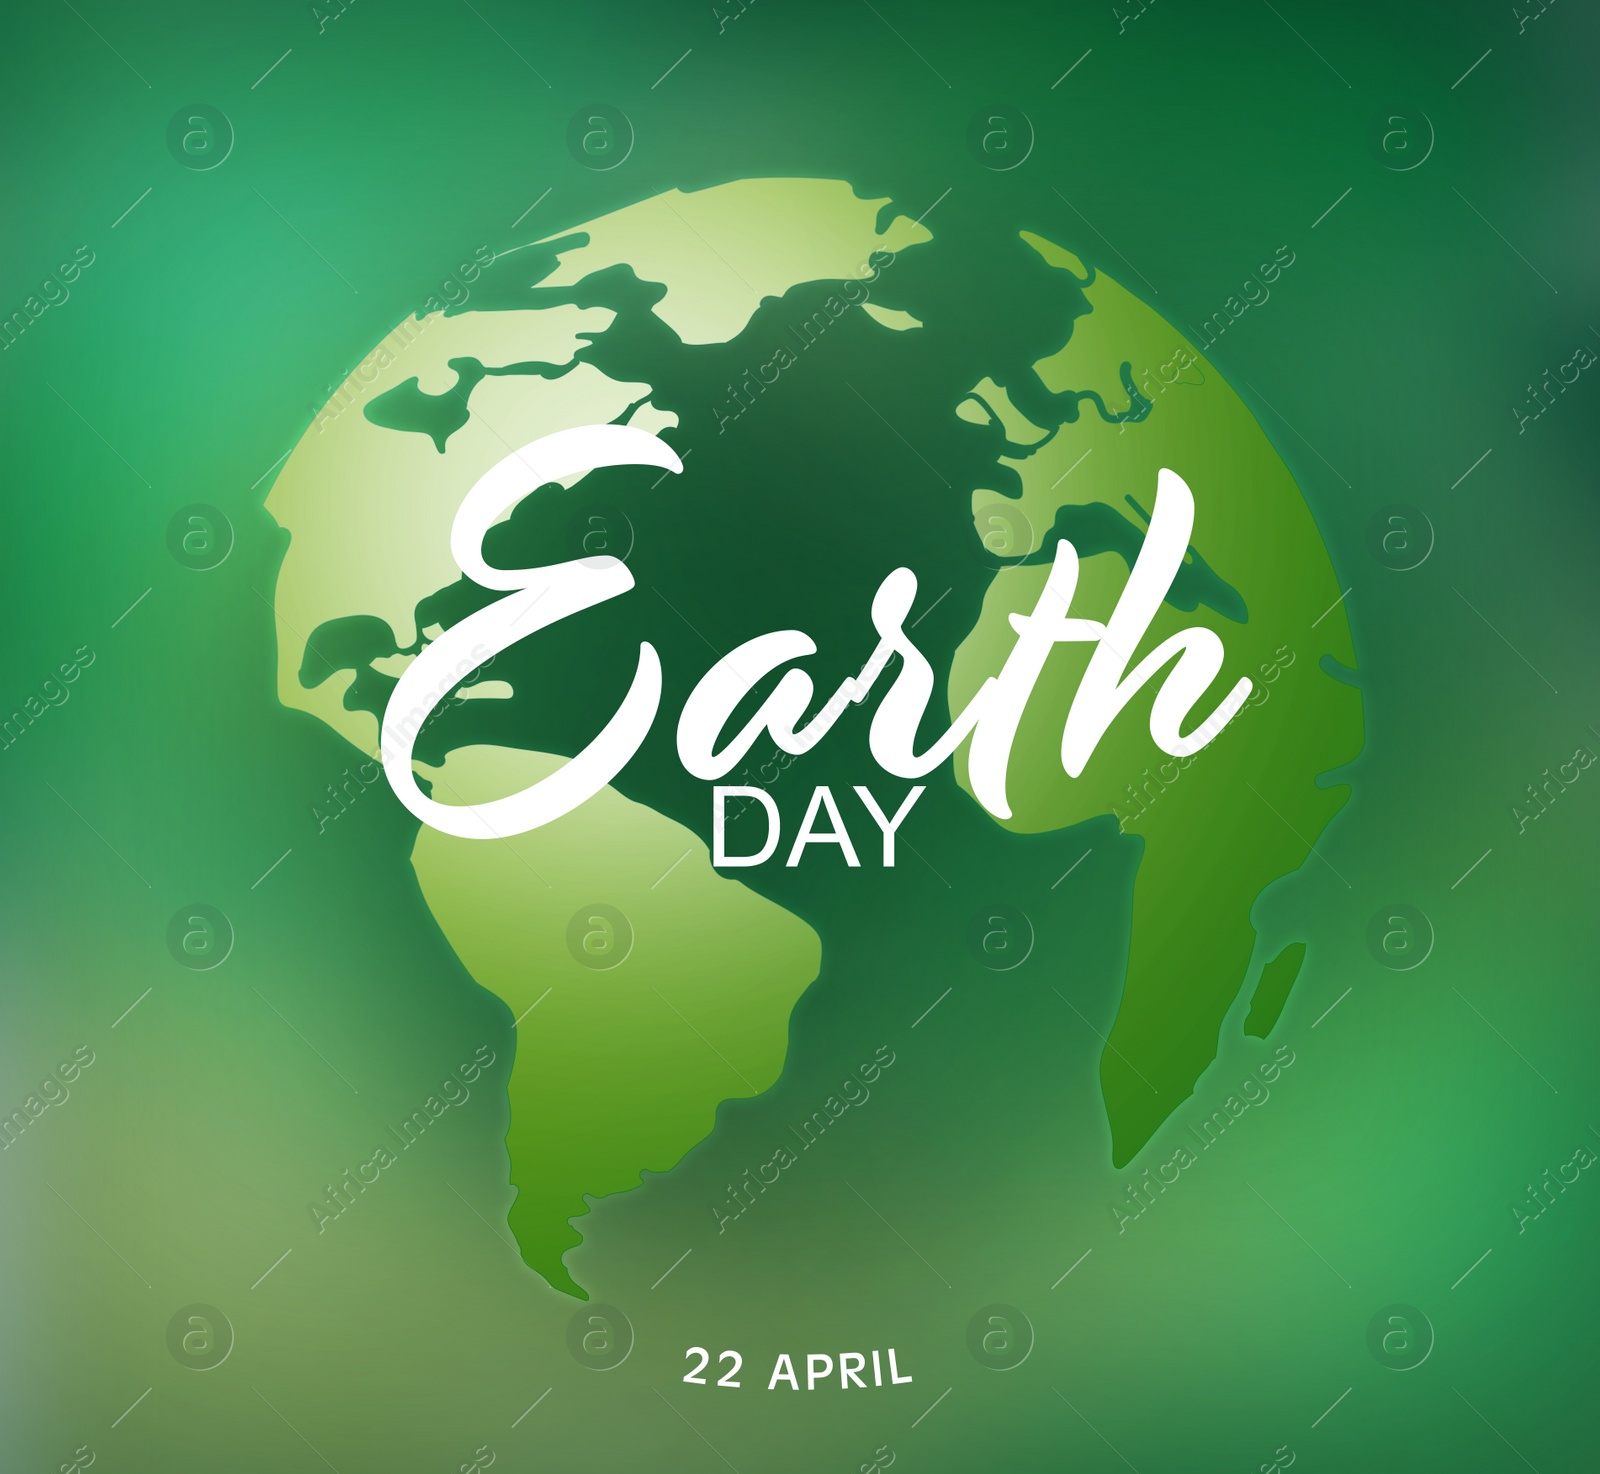 Illustration of Happy Earth day. Creative illustration of planet on green background